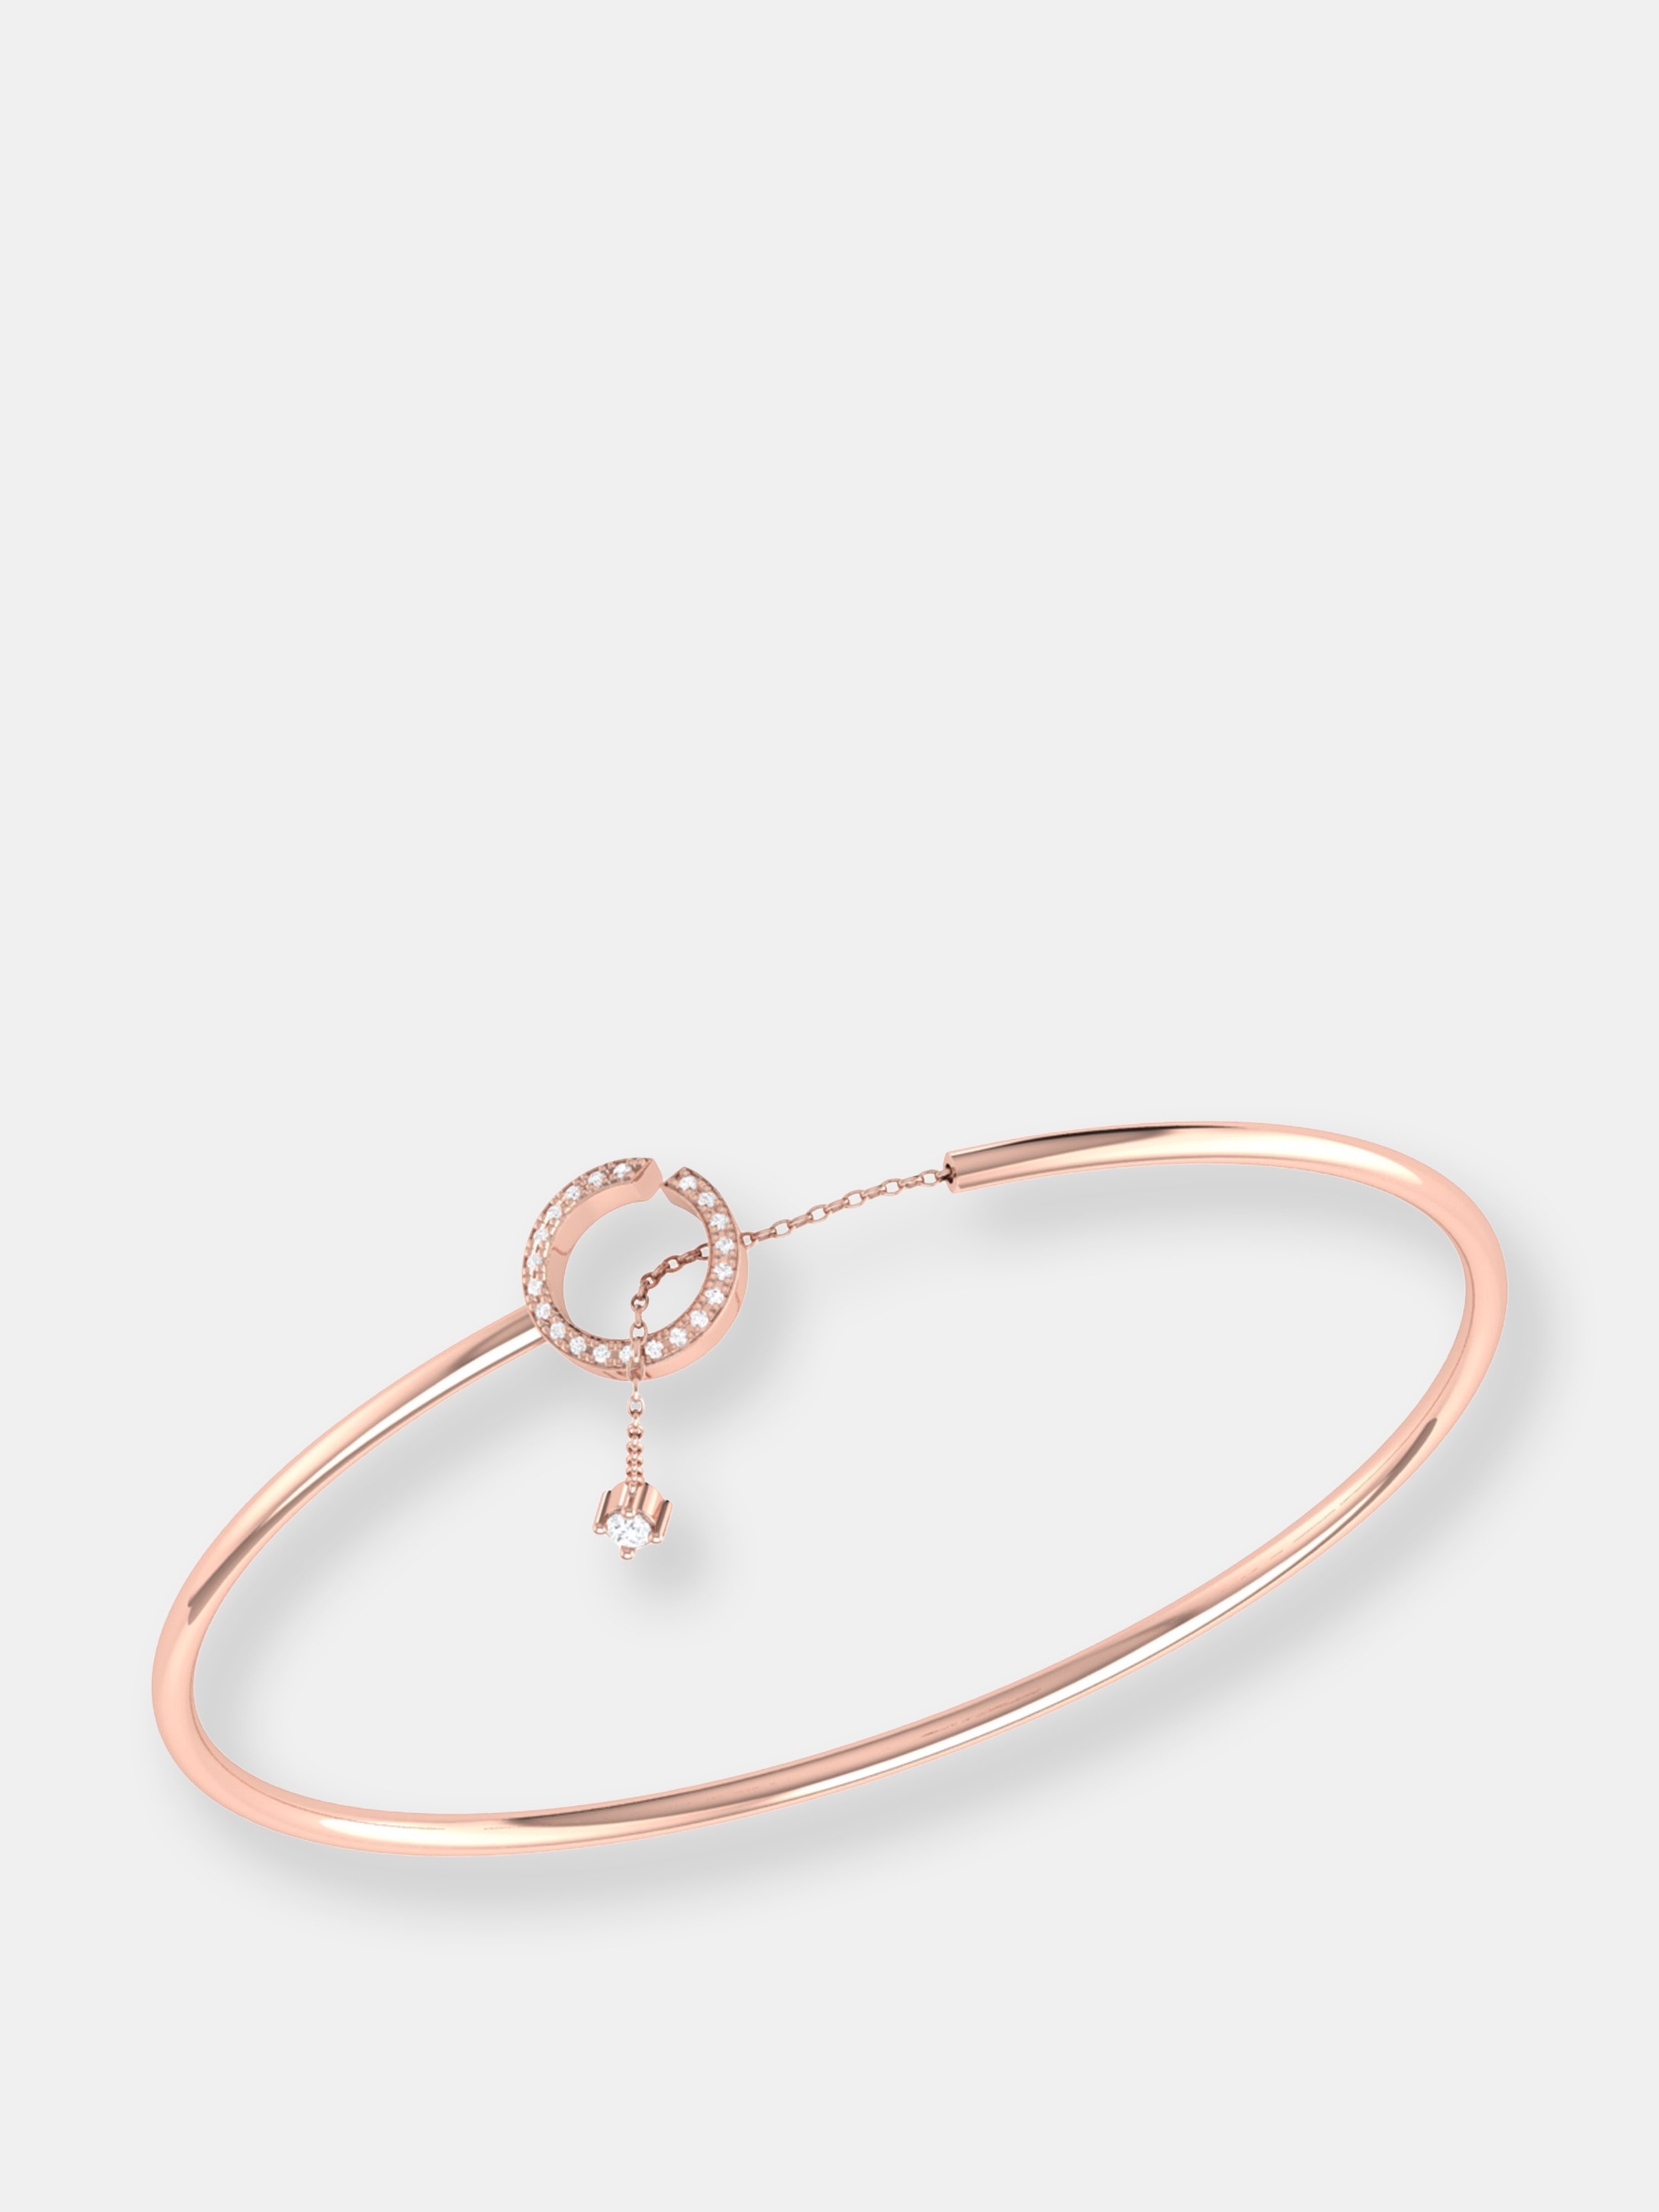 Luvmyjewelry Roundabout Circle Adjustable Diamond Cuff In 14k Rose Gold Vermeil On Sterling Silver In Pink